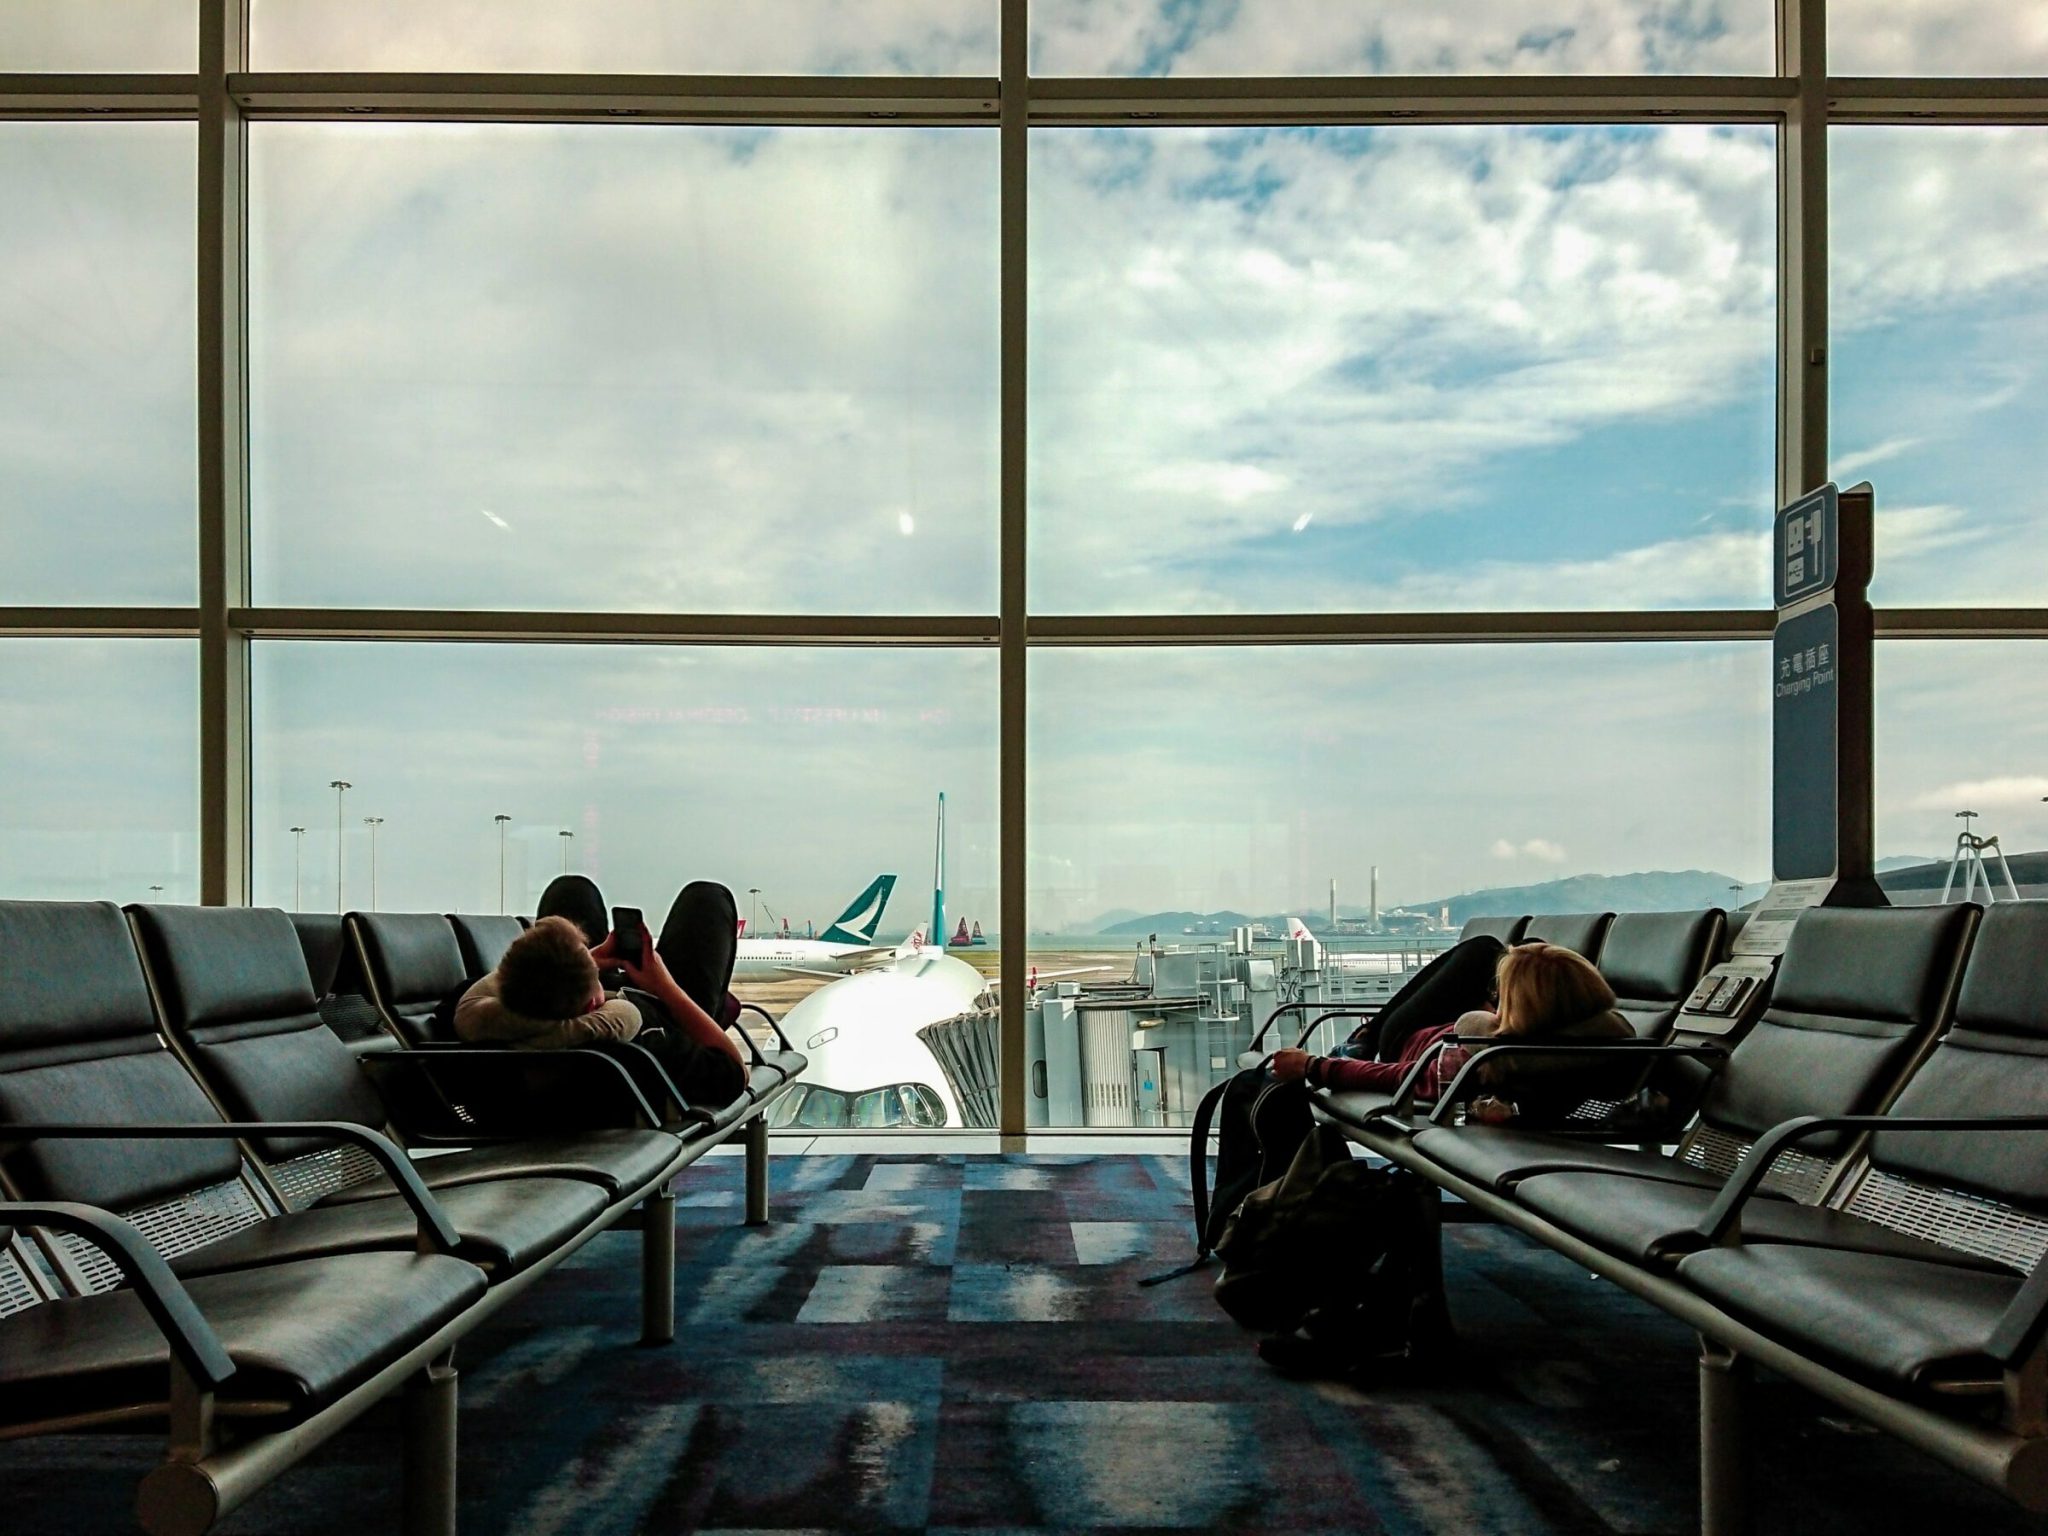 Two people lying down on benches in an airport lounge